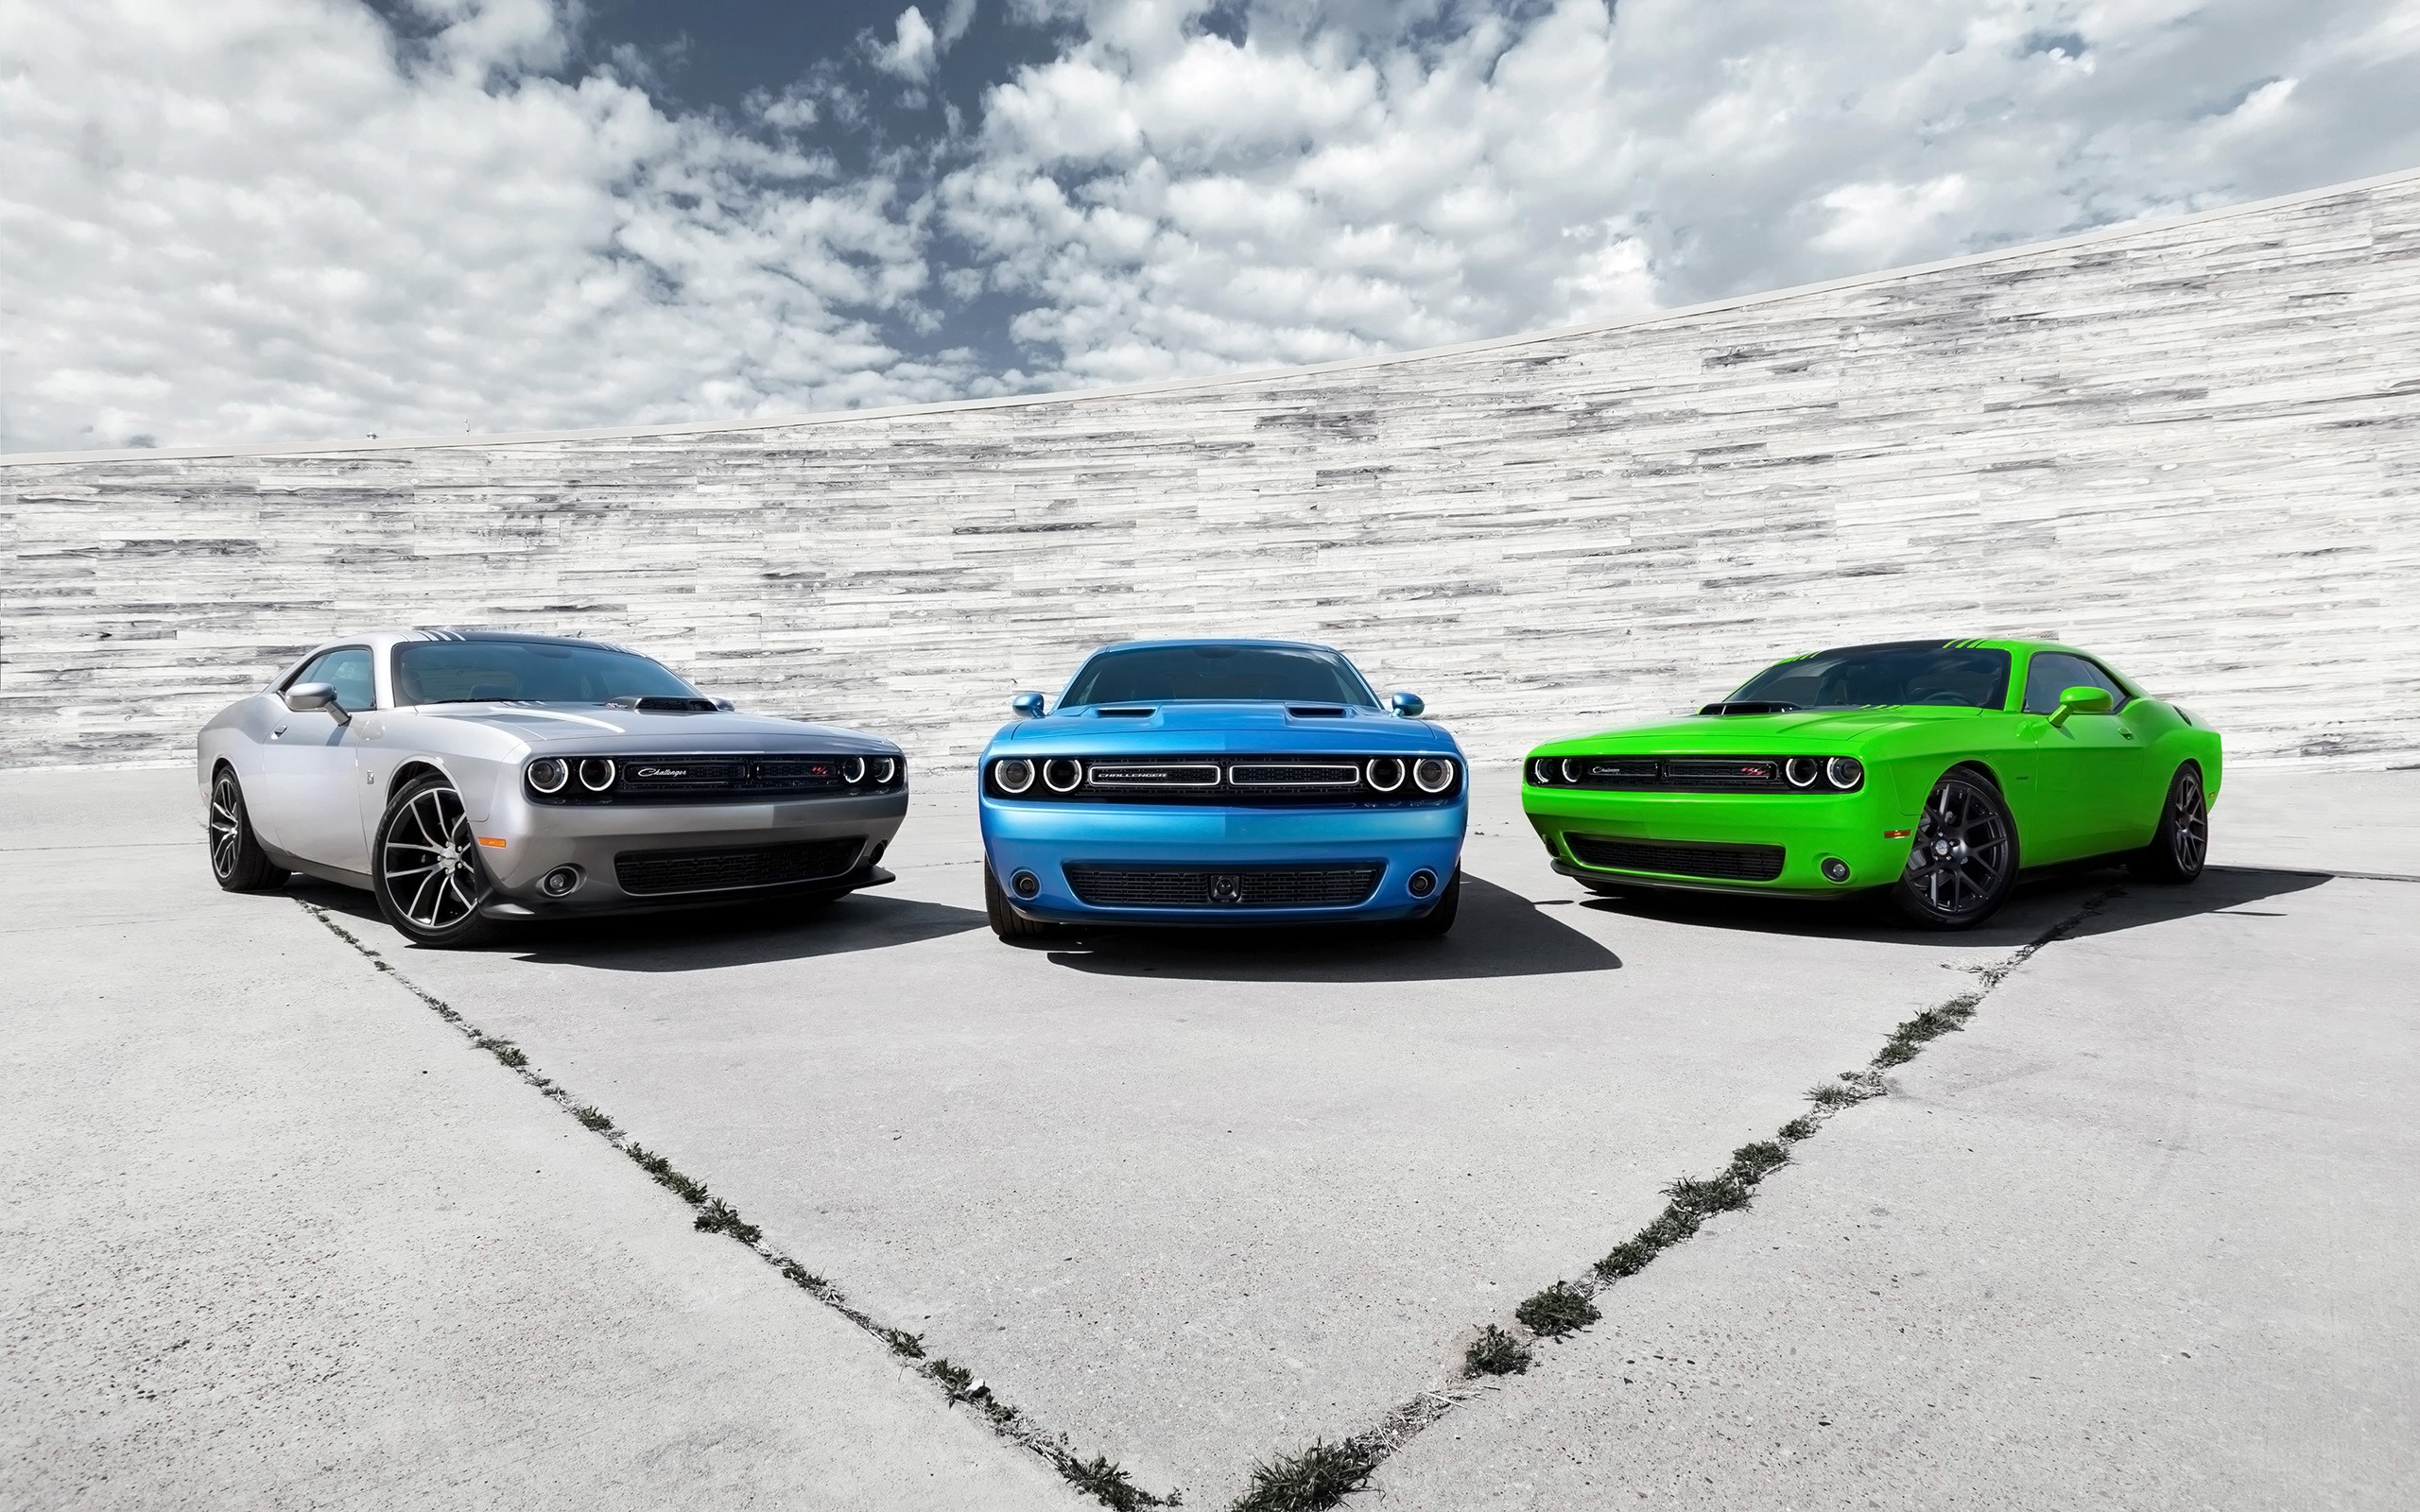 Dodge Dodge Challenger Car Muscle Cars Dodge Challenger R T Silver Cars Clouds Blue Cars Green Cars 2560x1600